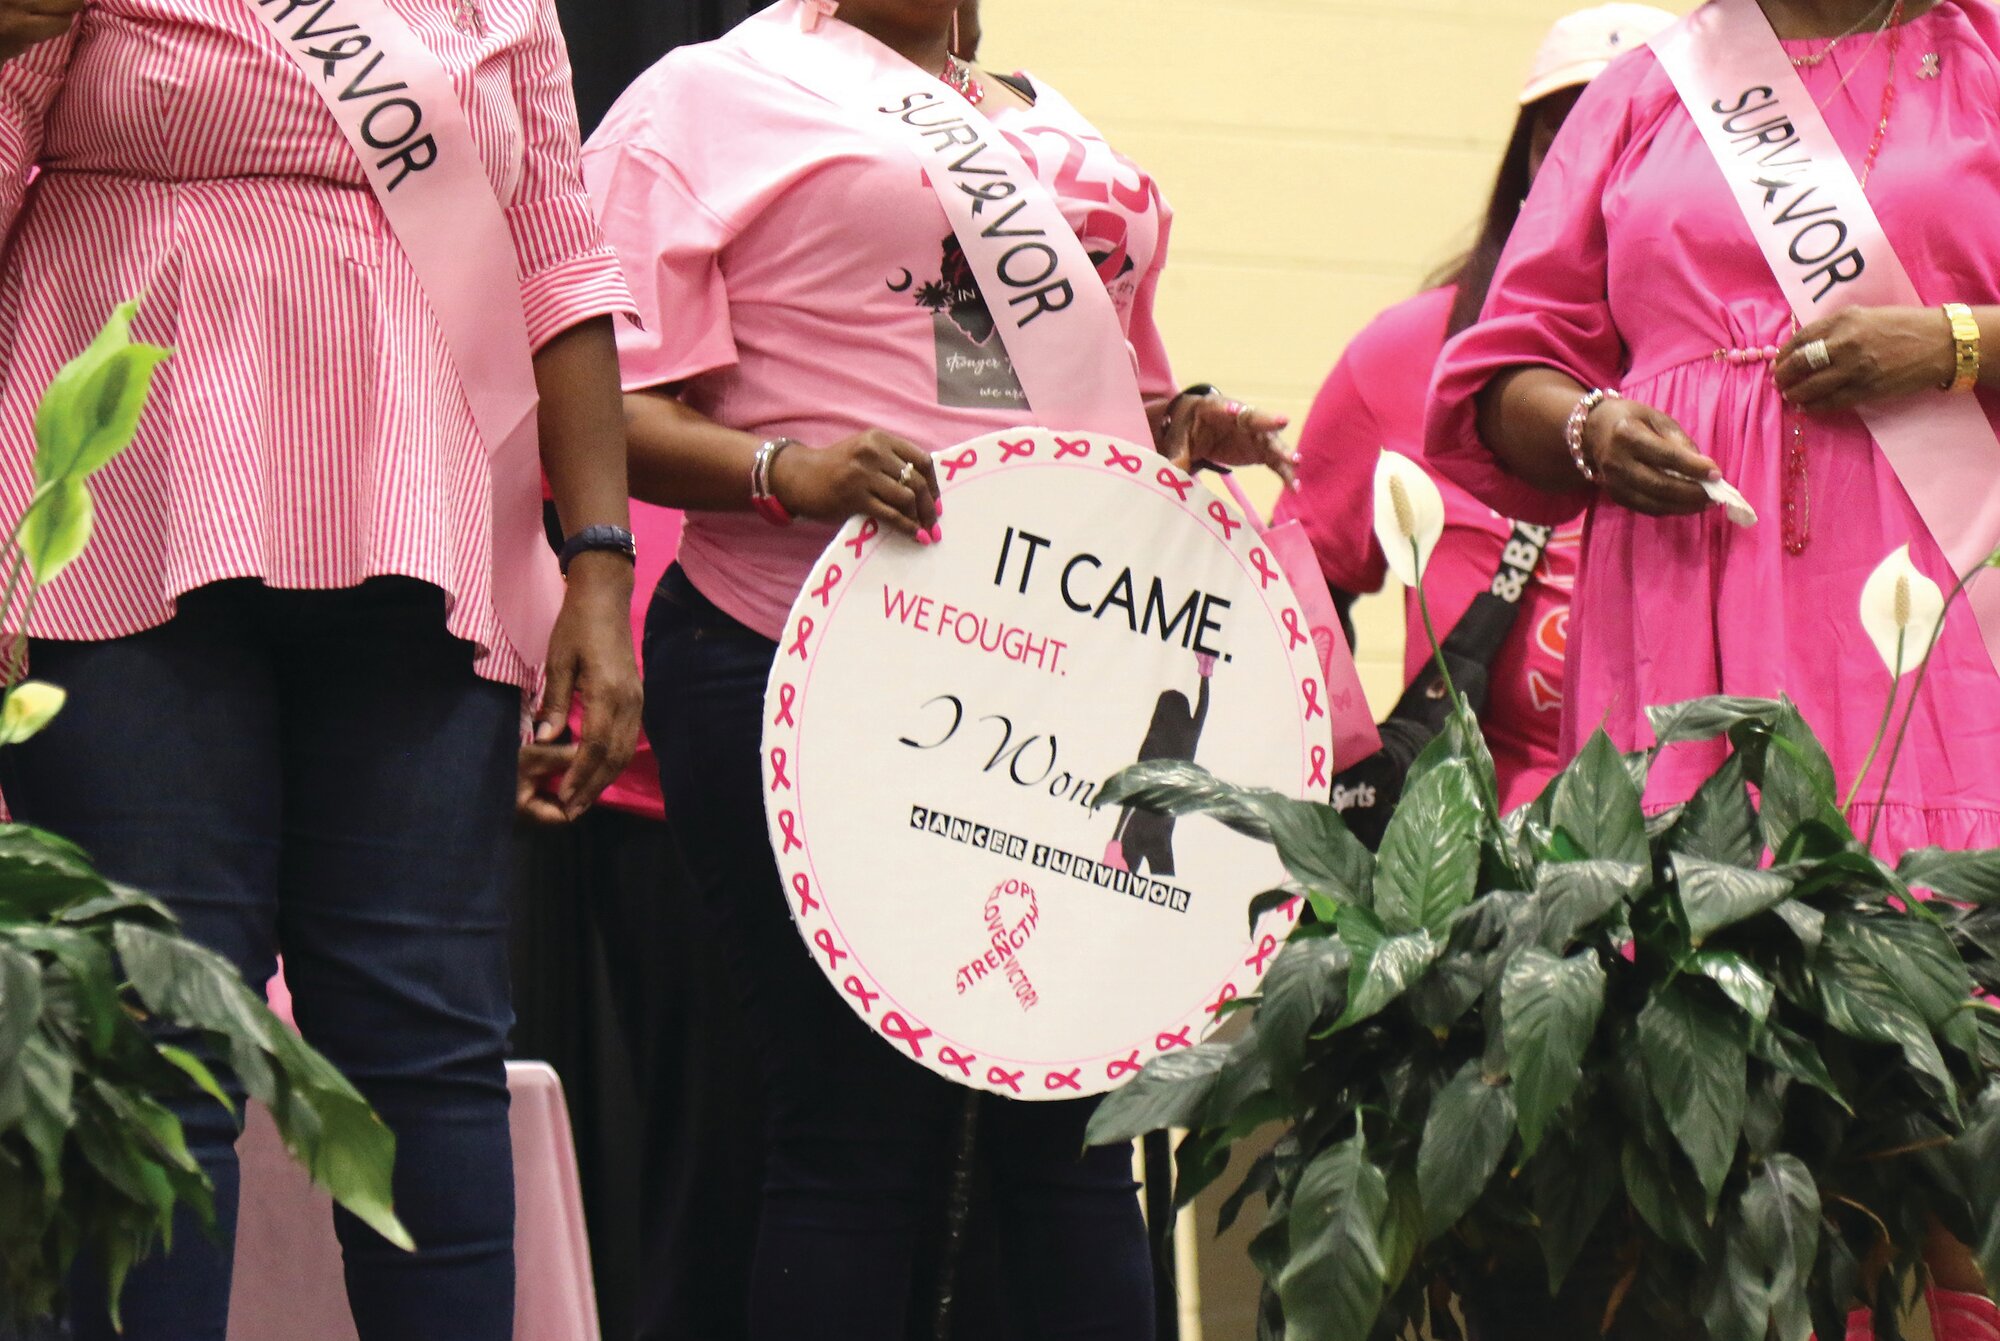 Radiant in pink: Sumter community unites to raise awareness of